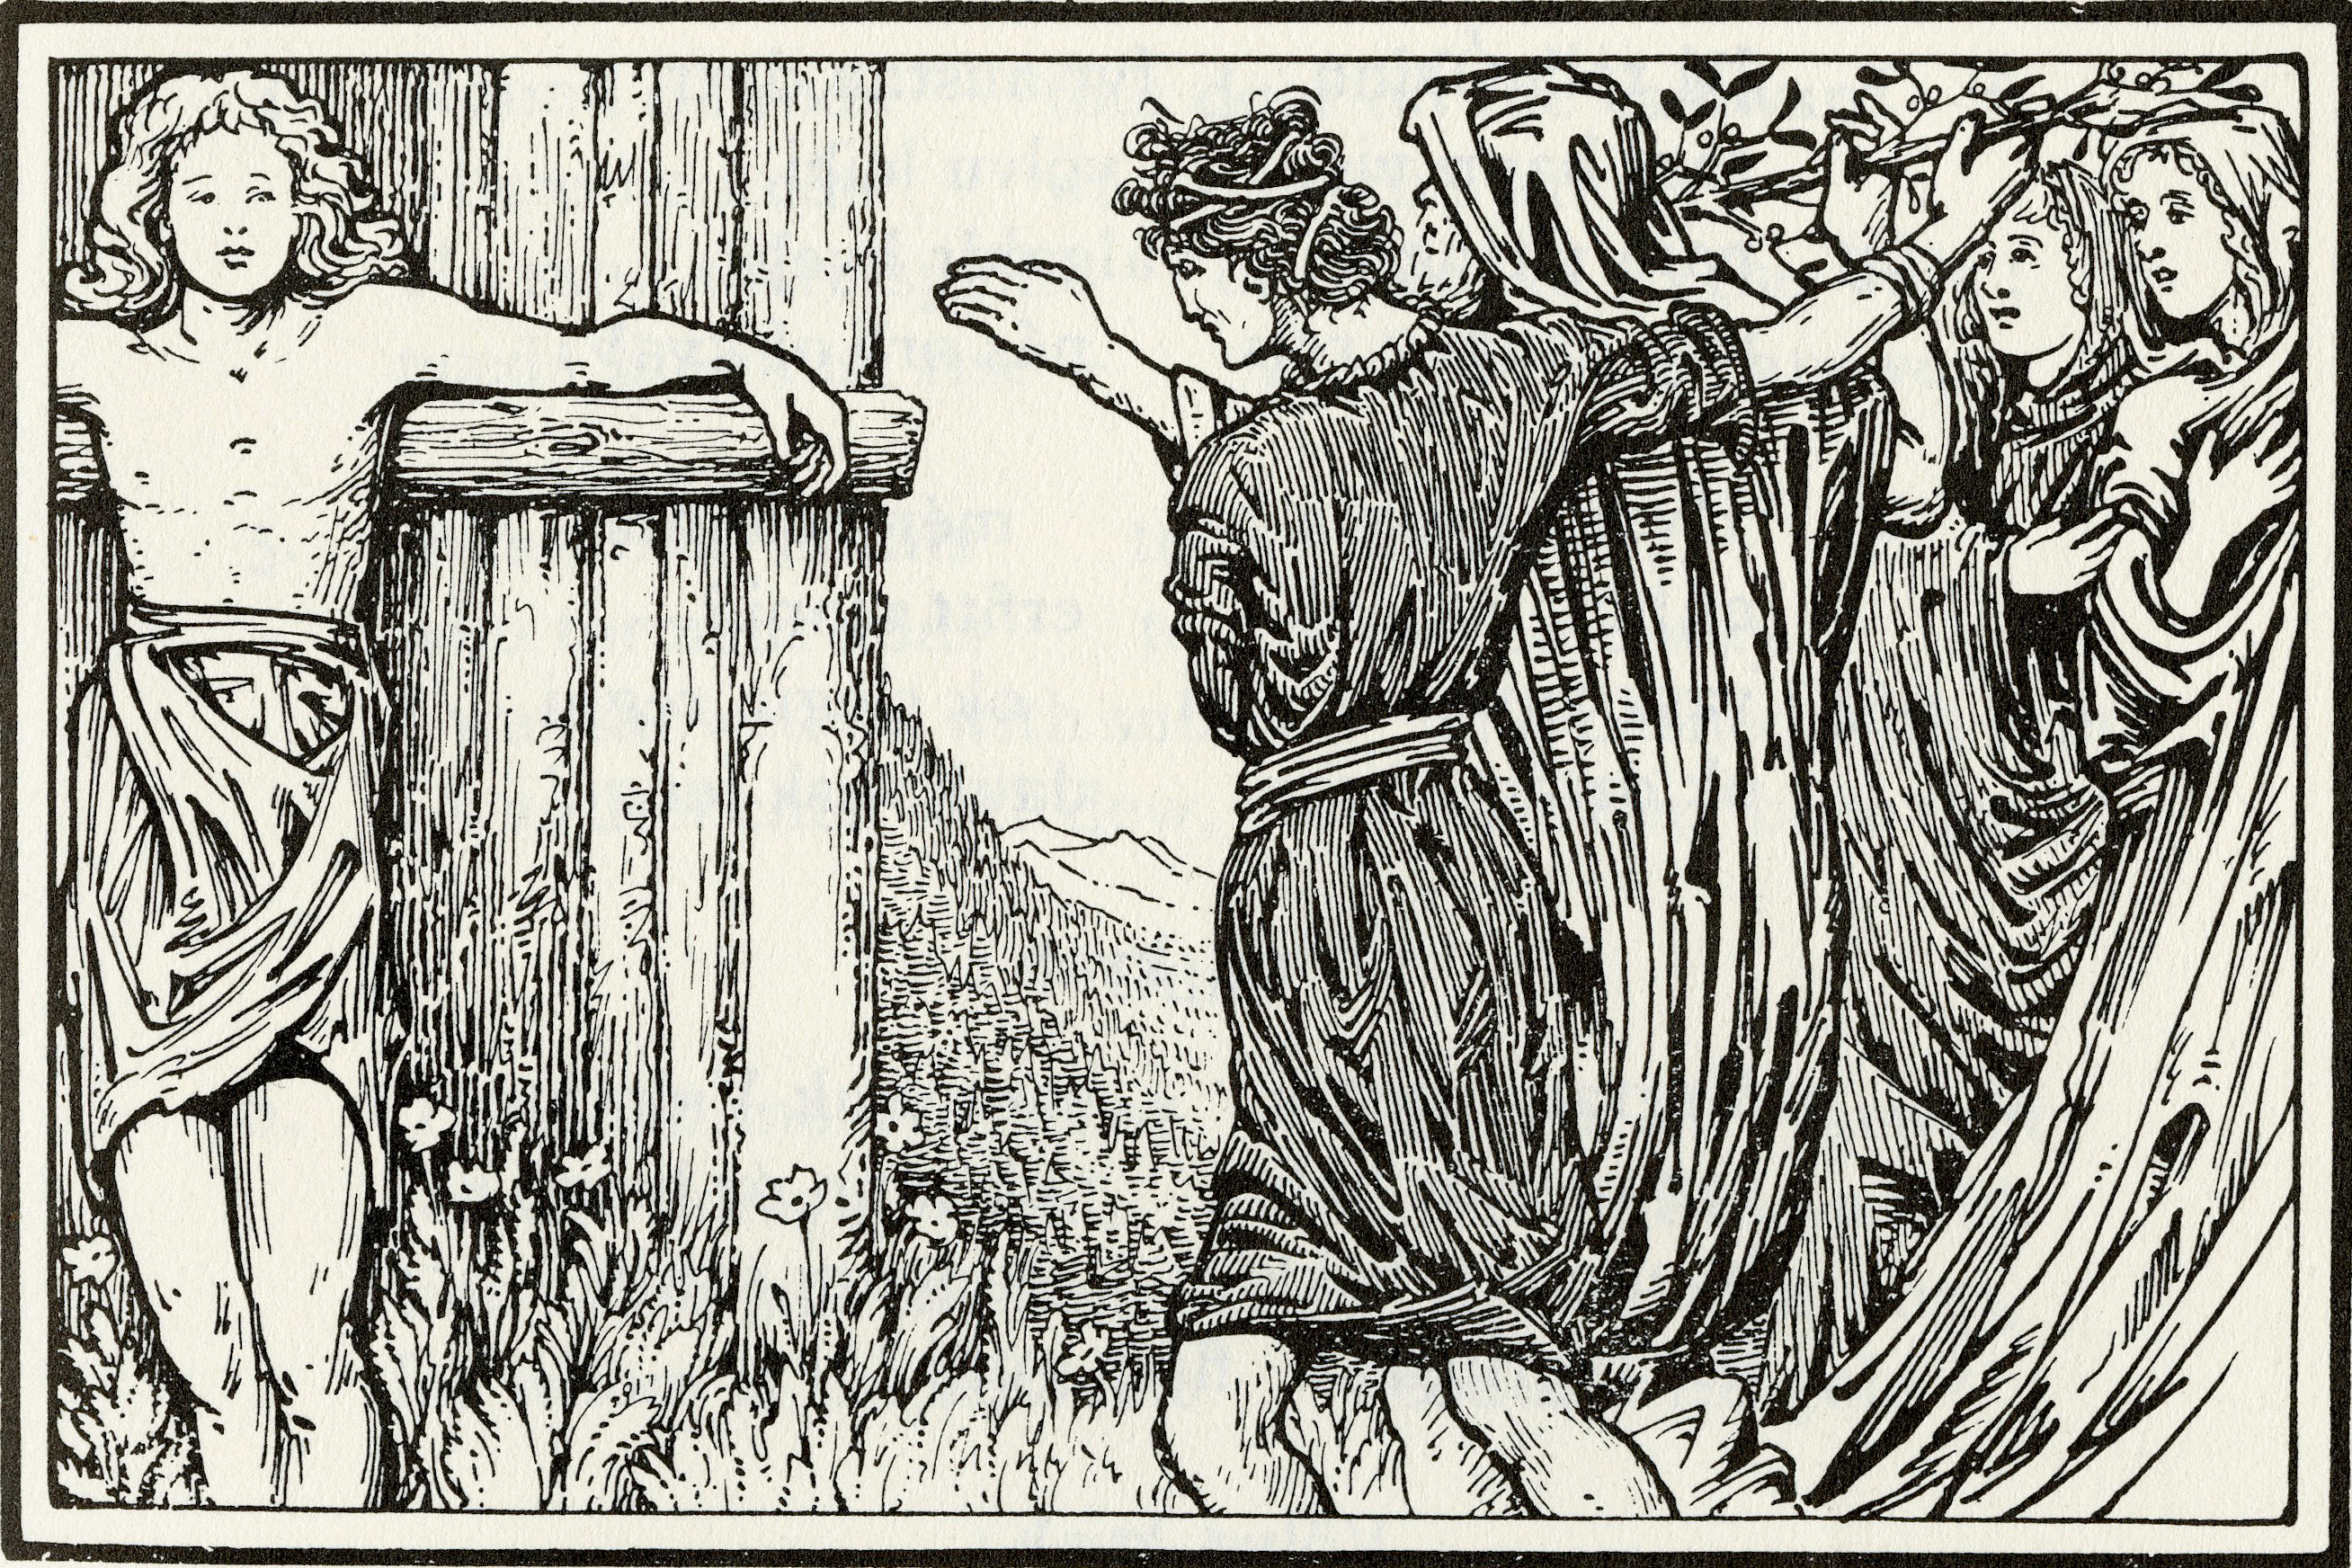 The Death of Baldr